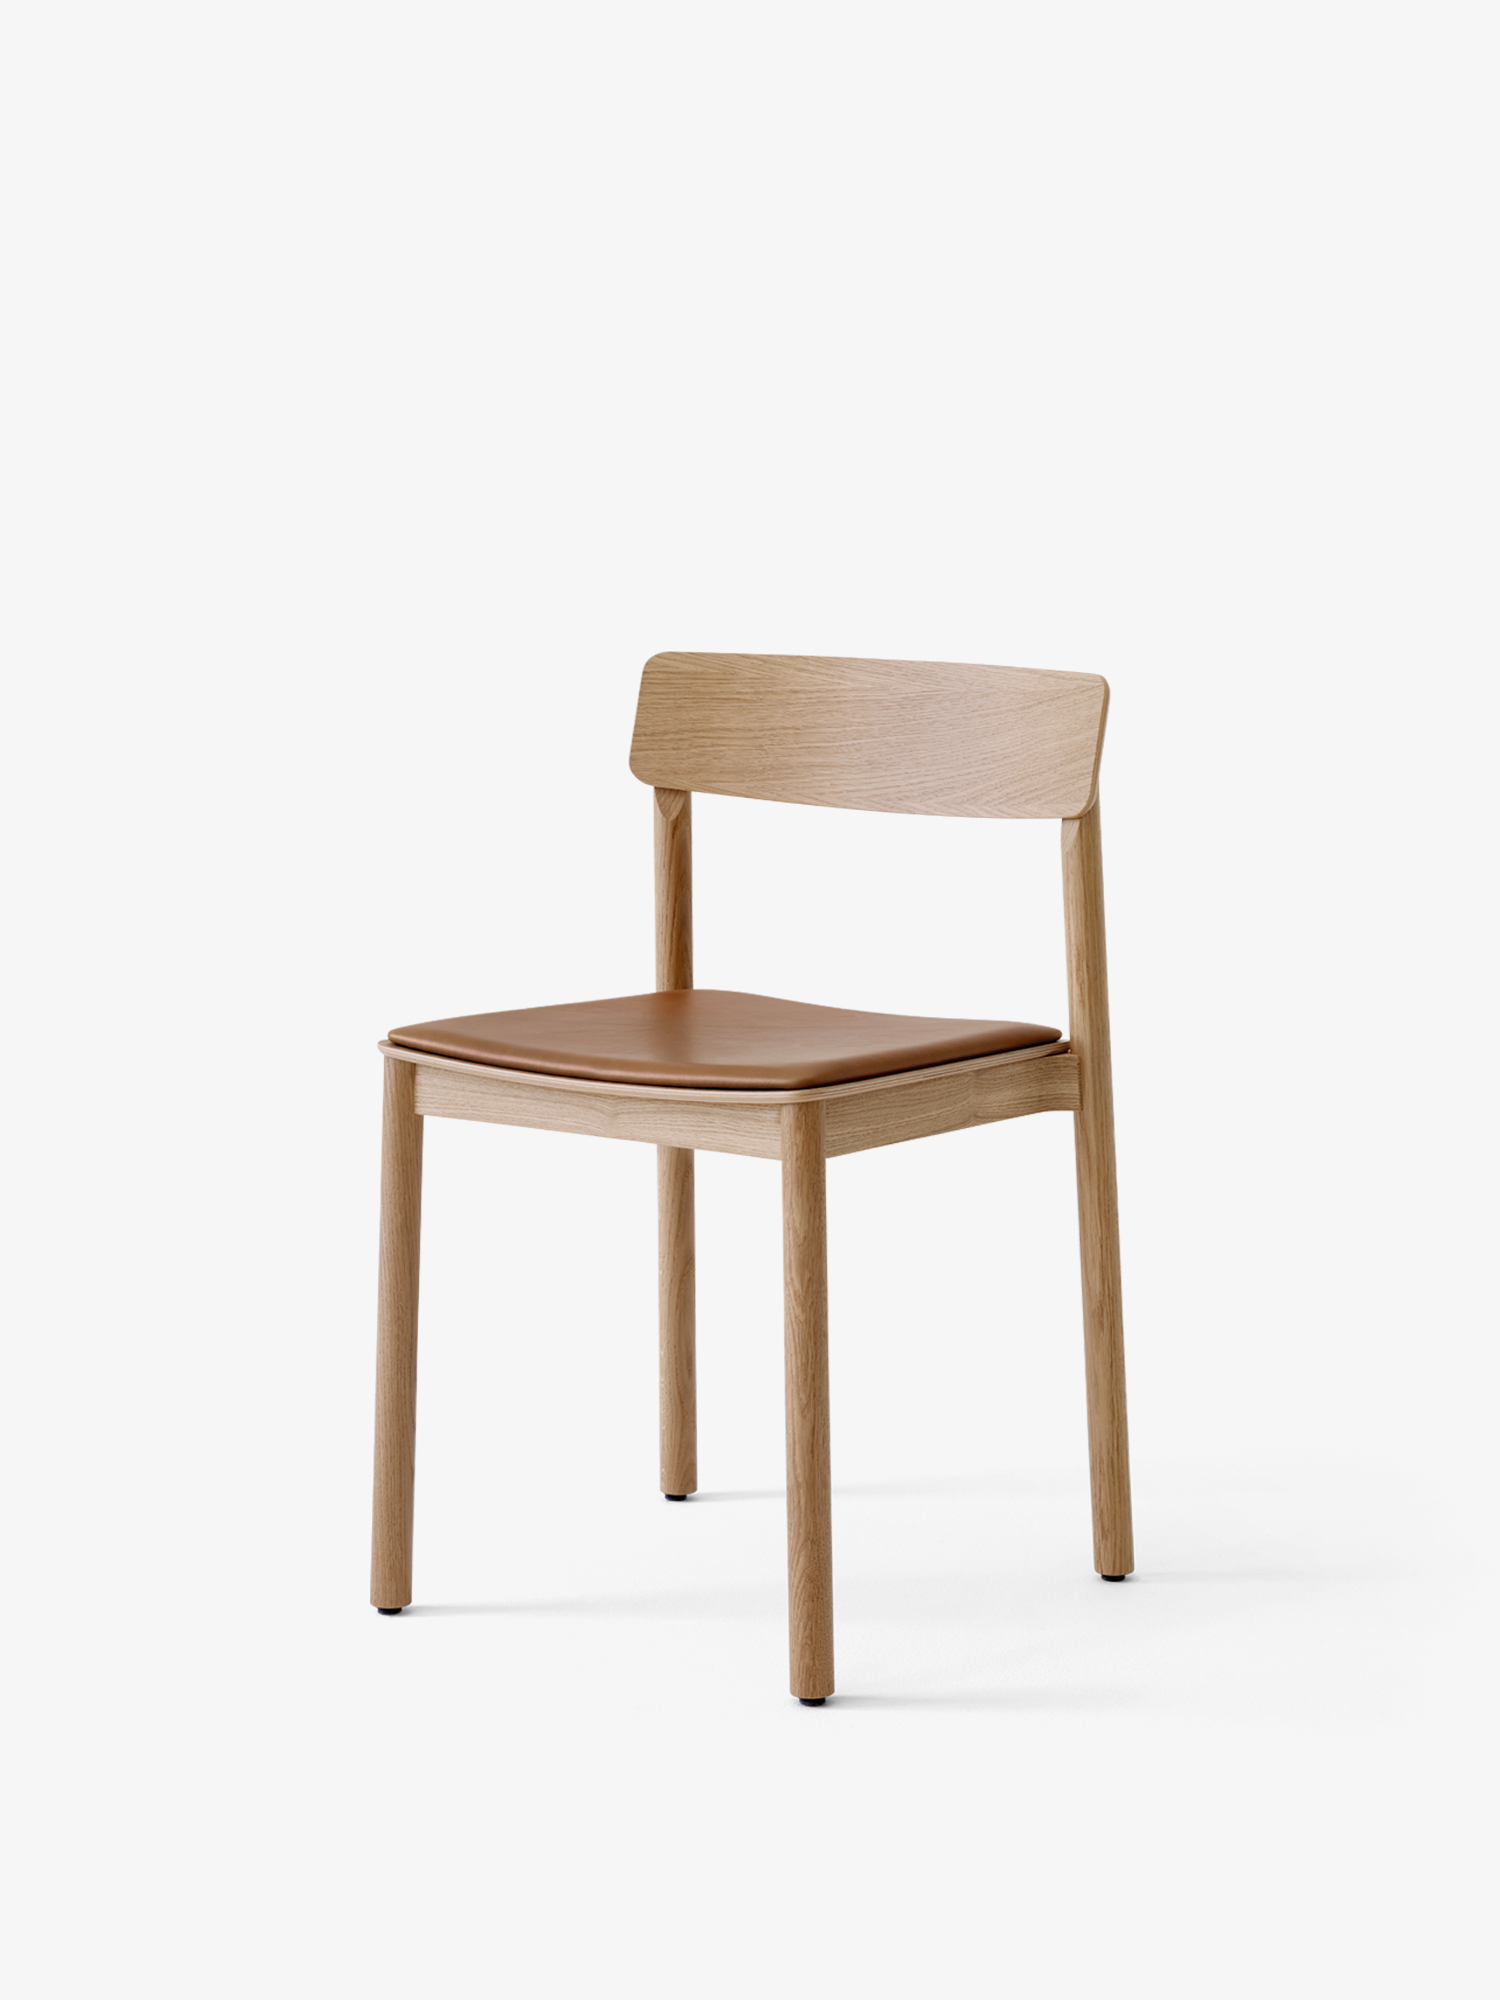 Oak Betty Chair by Thau & Kallio with upholstered seating | Aesence